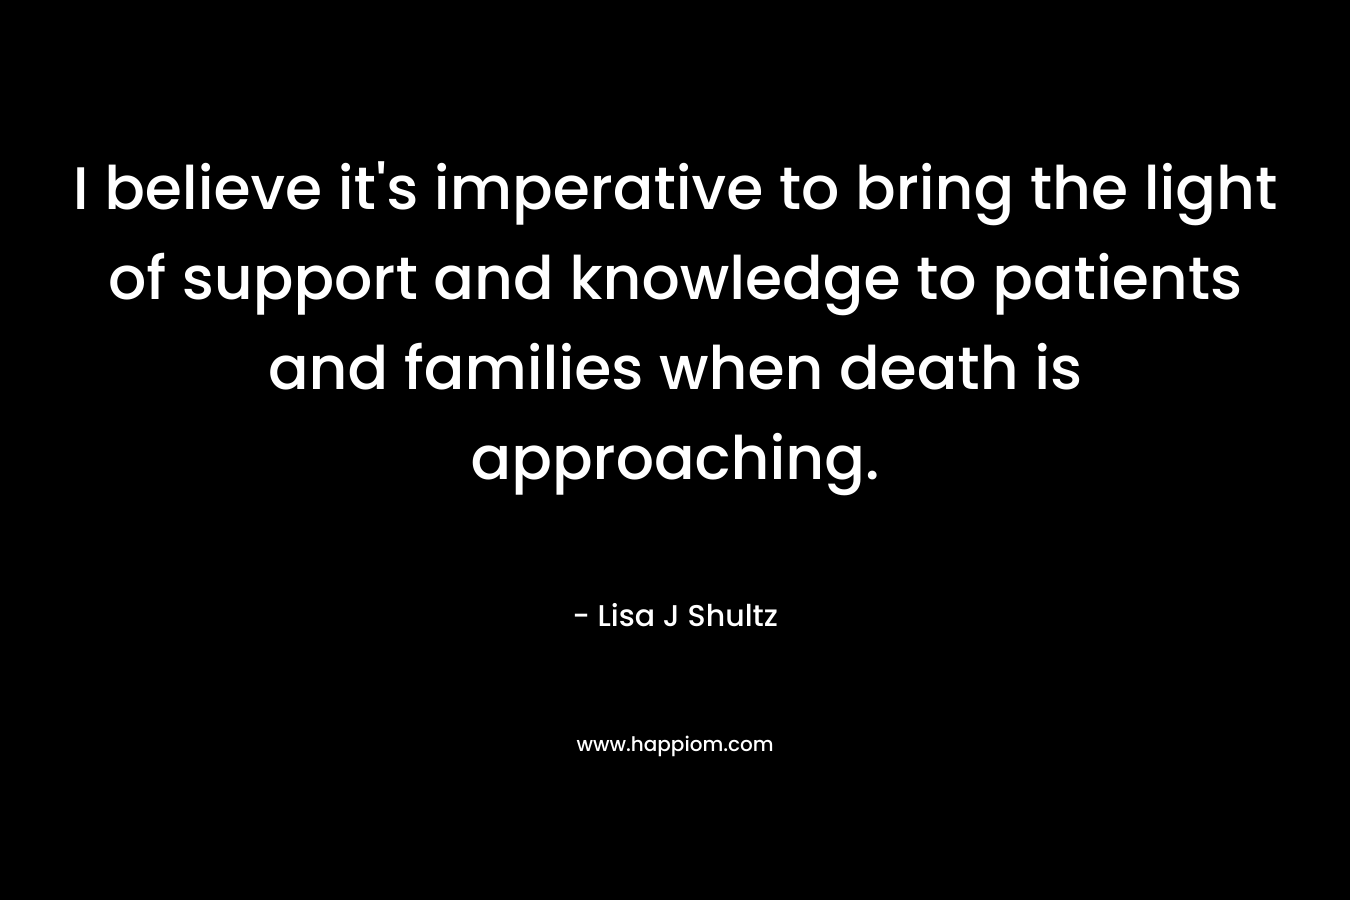 I believe it’s imperative to bring the light of support and knowledge to patients and families when death is approaching. – Lisa J Shultz